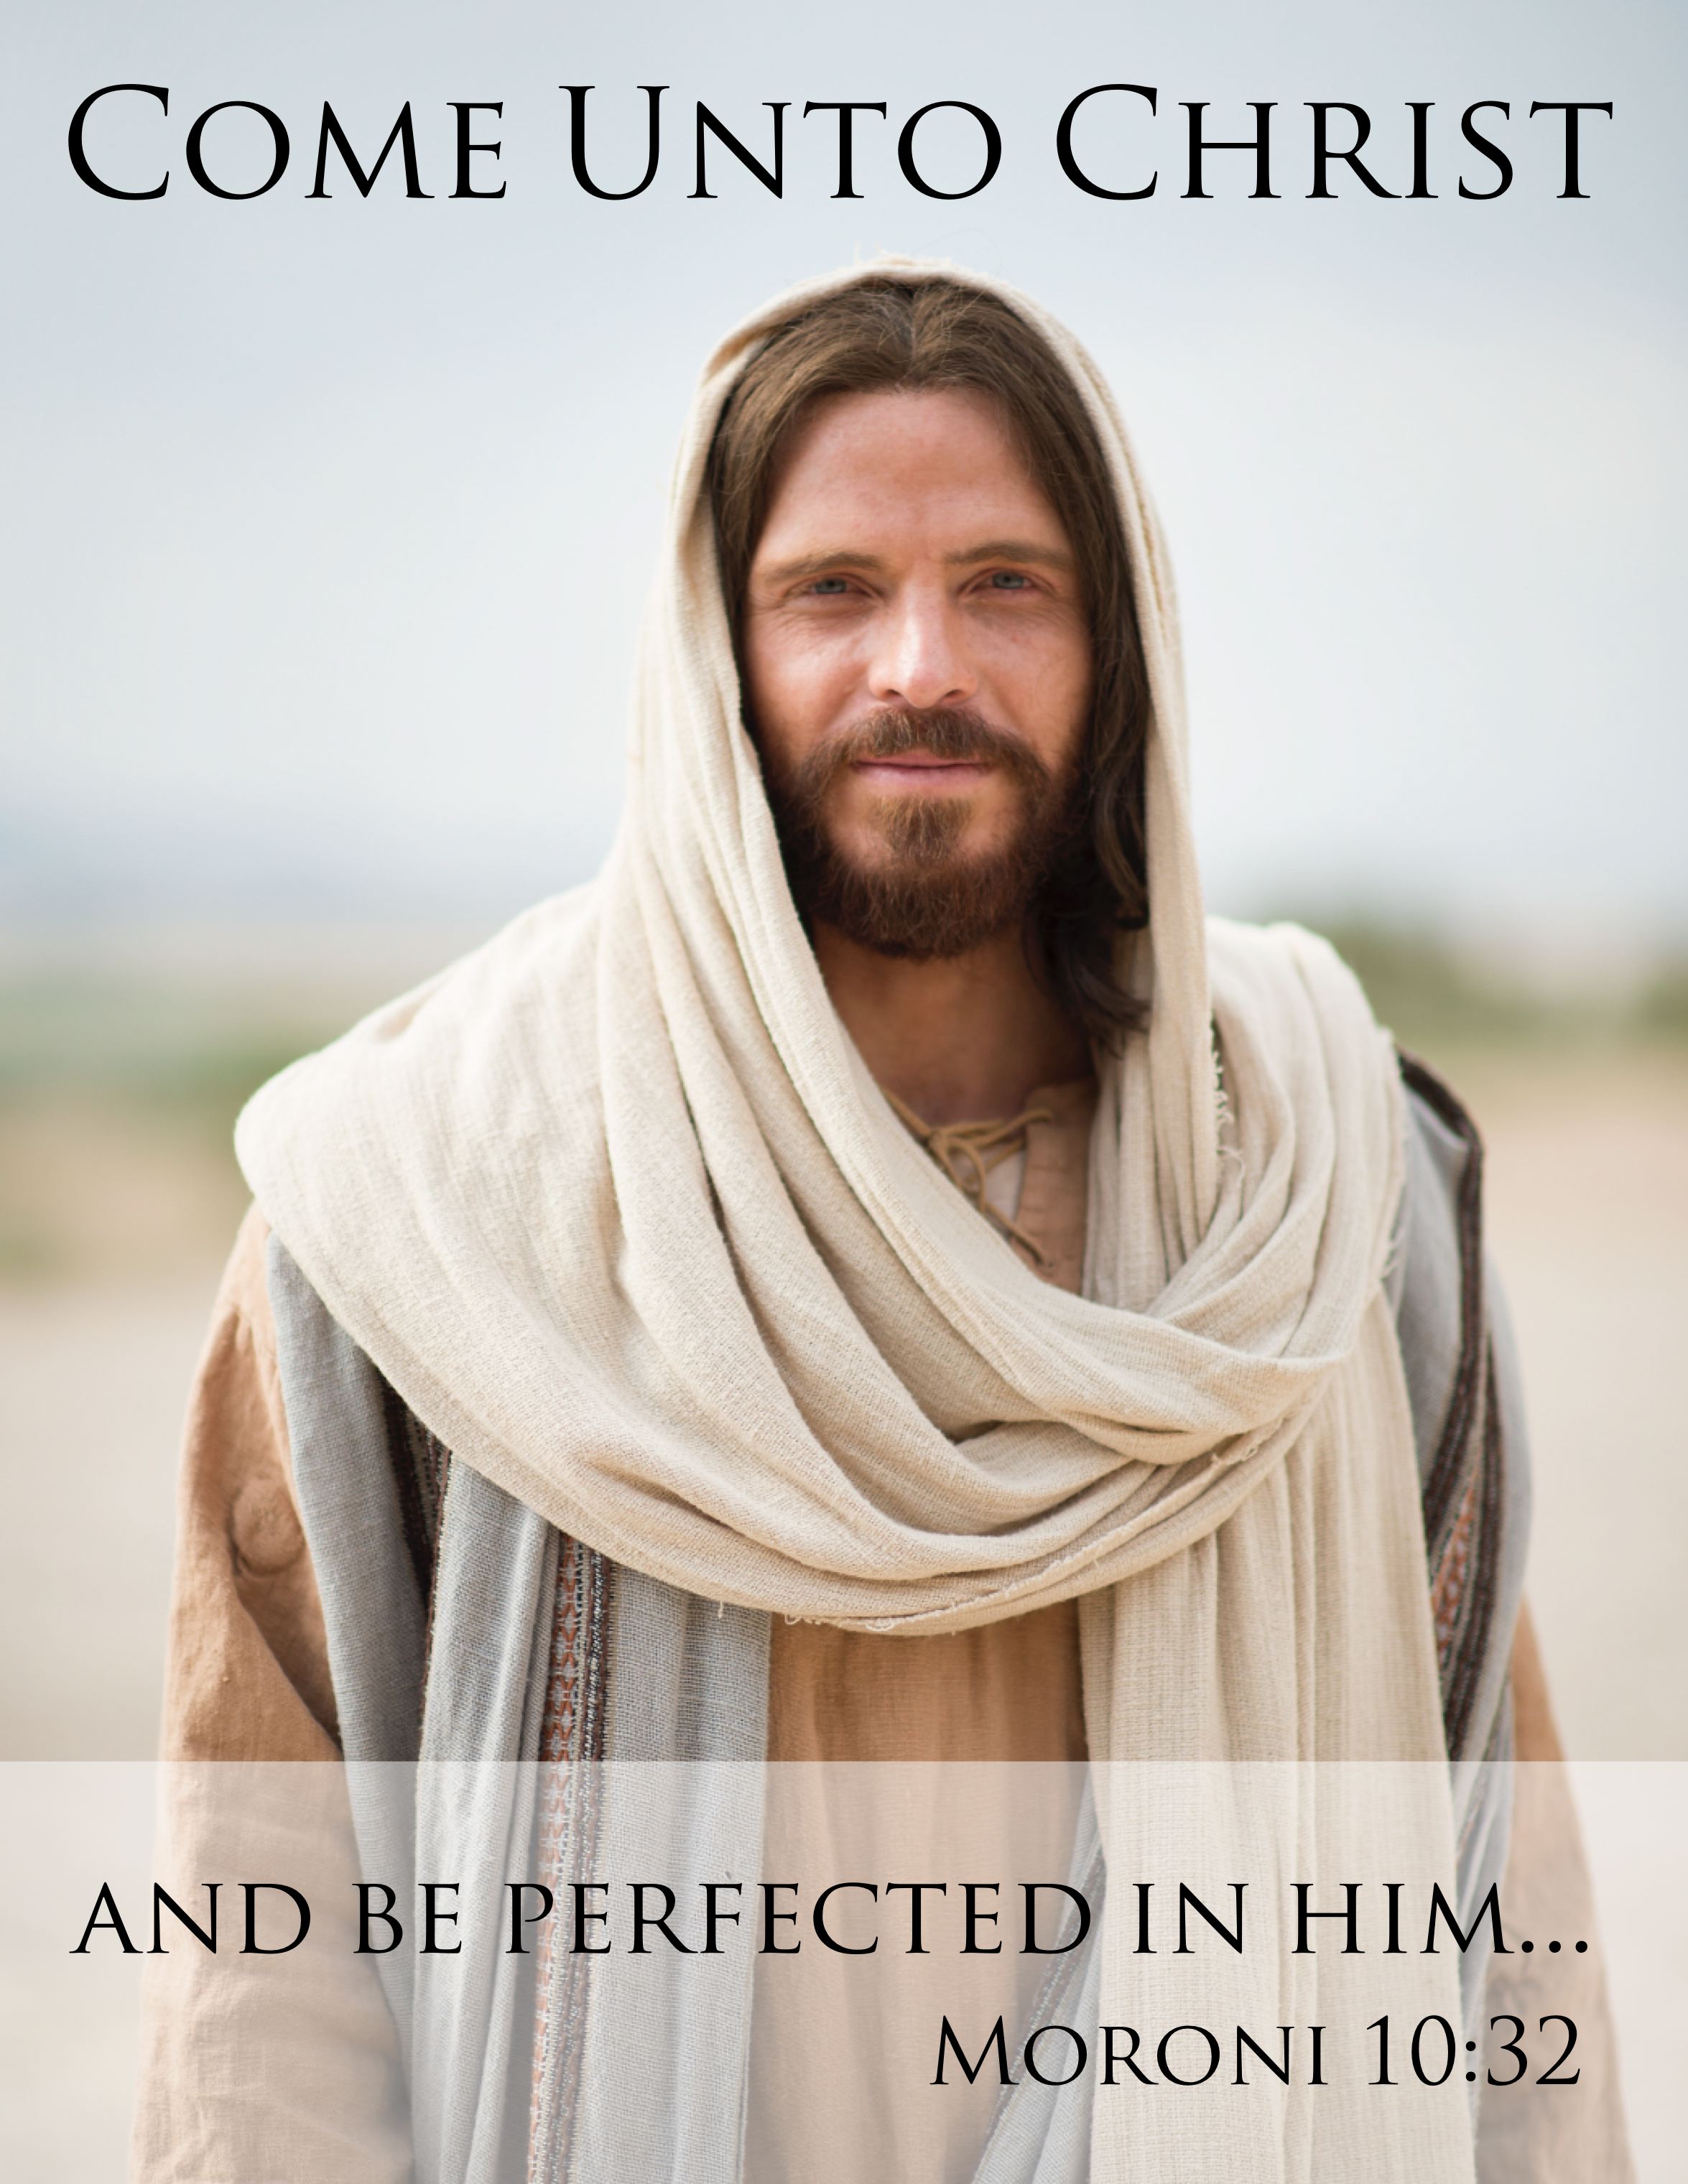 Image From Lds Org